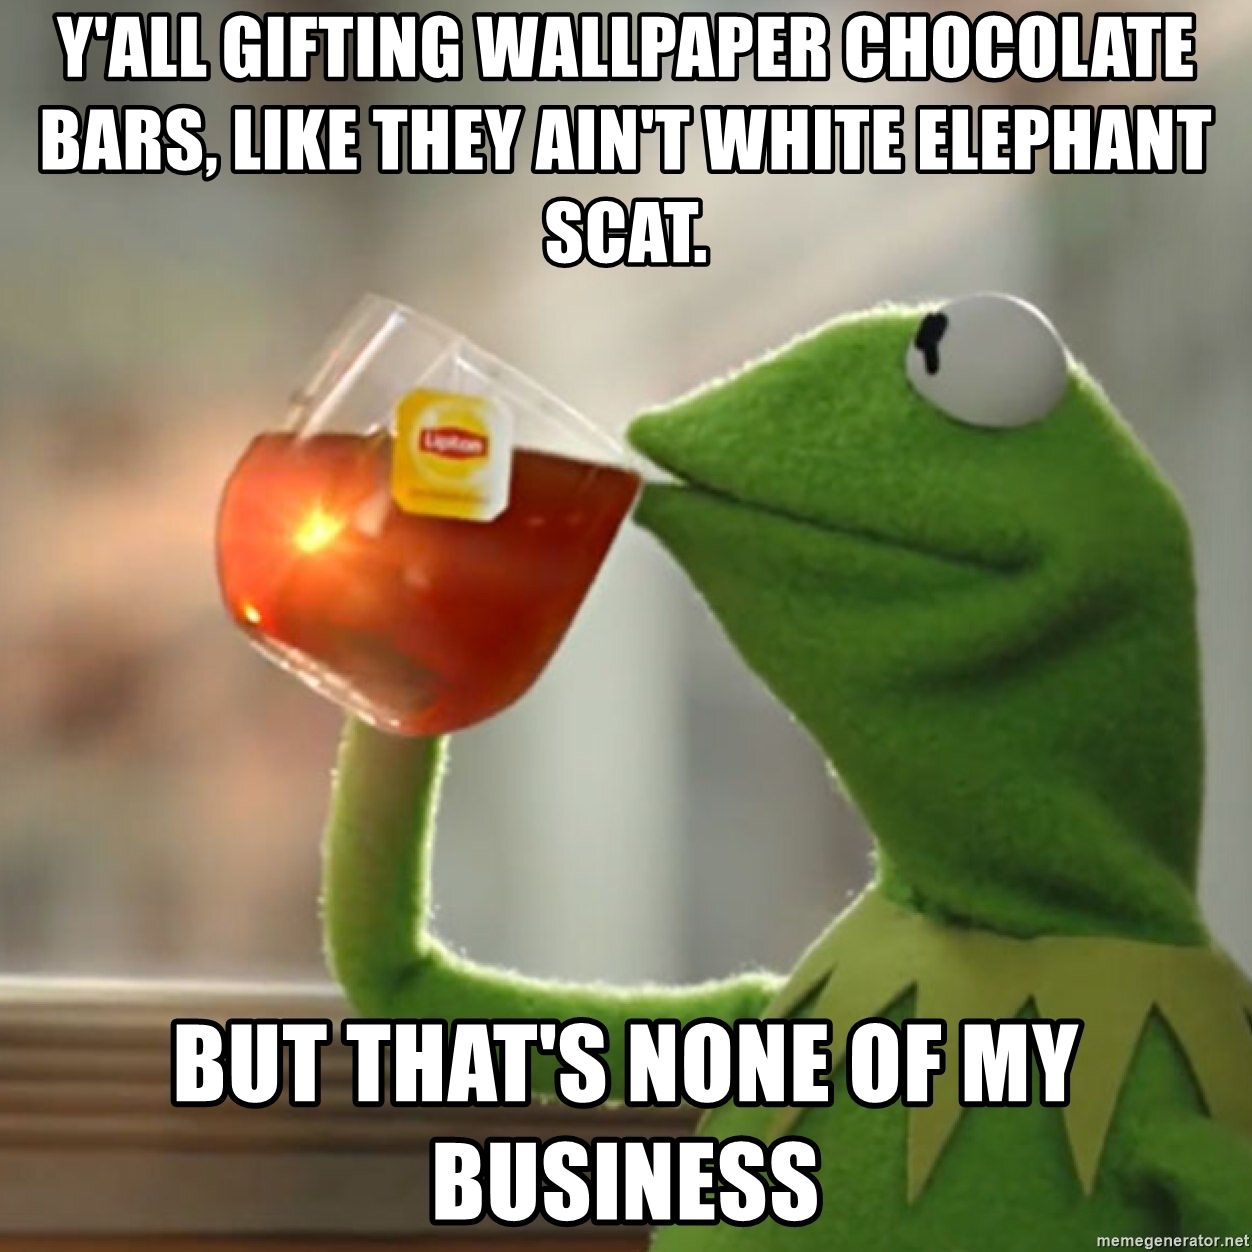 Y'all gifting wallpaper chocolate bars, like they ain't white